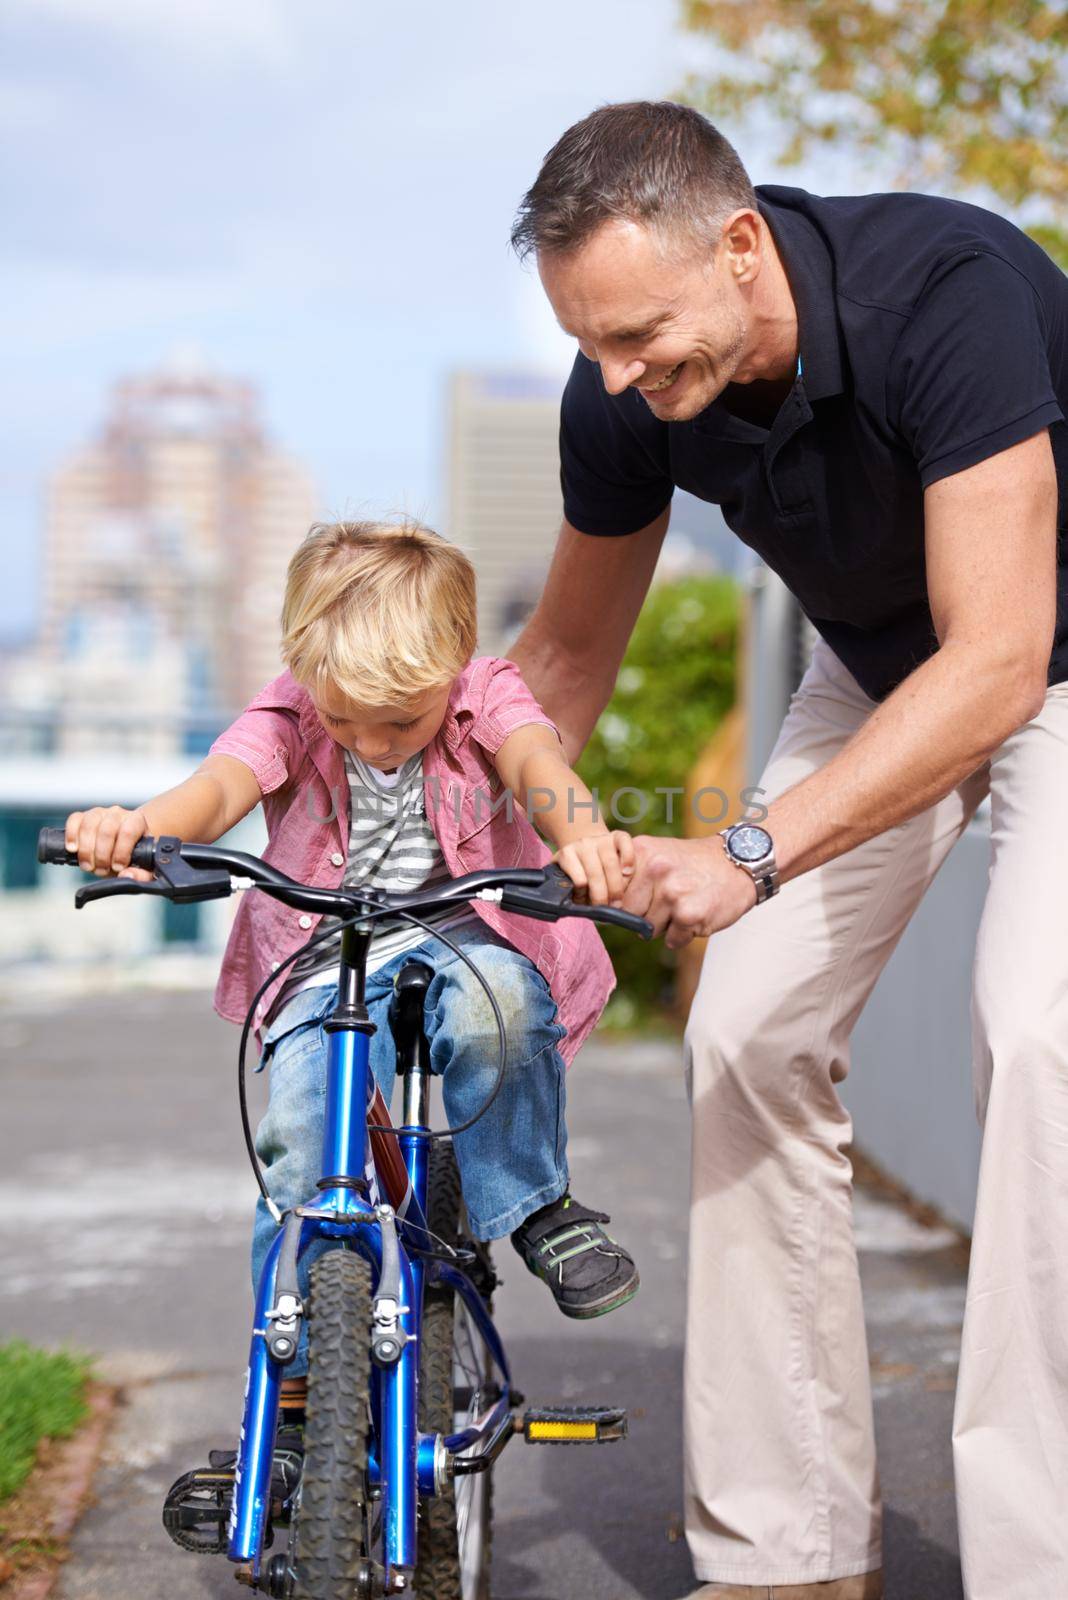 His first bike ride. A father teaching his young son to ride a bike. by YuriArcurs